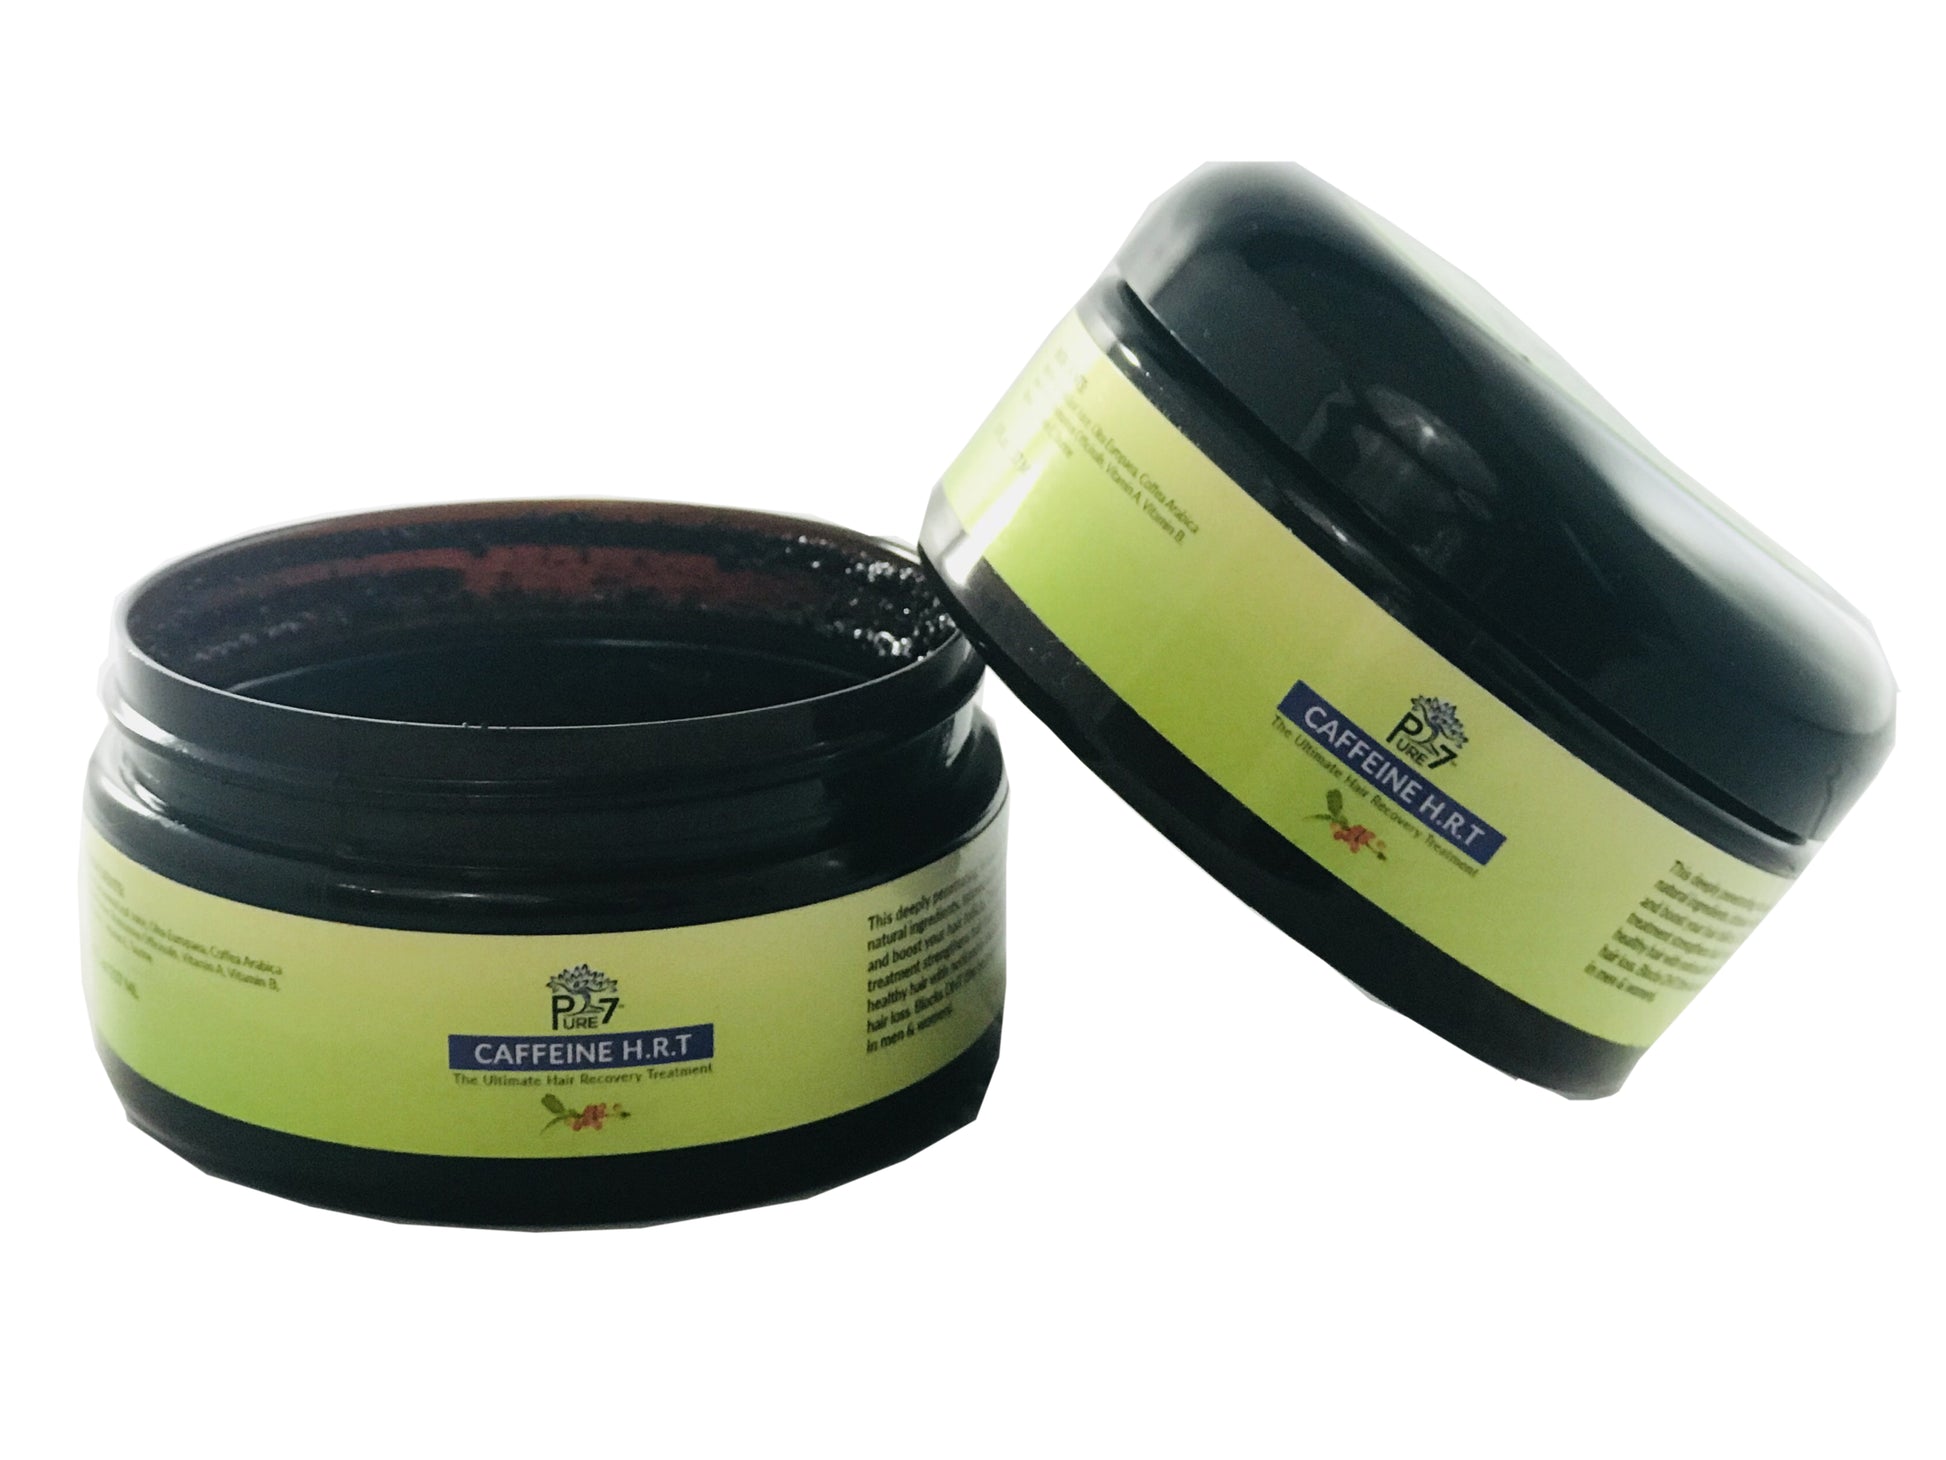 Give Your Hair A Boost With A Caffeine Infused Hair Recovery Treatment - Hair & Scalp Meds